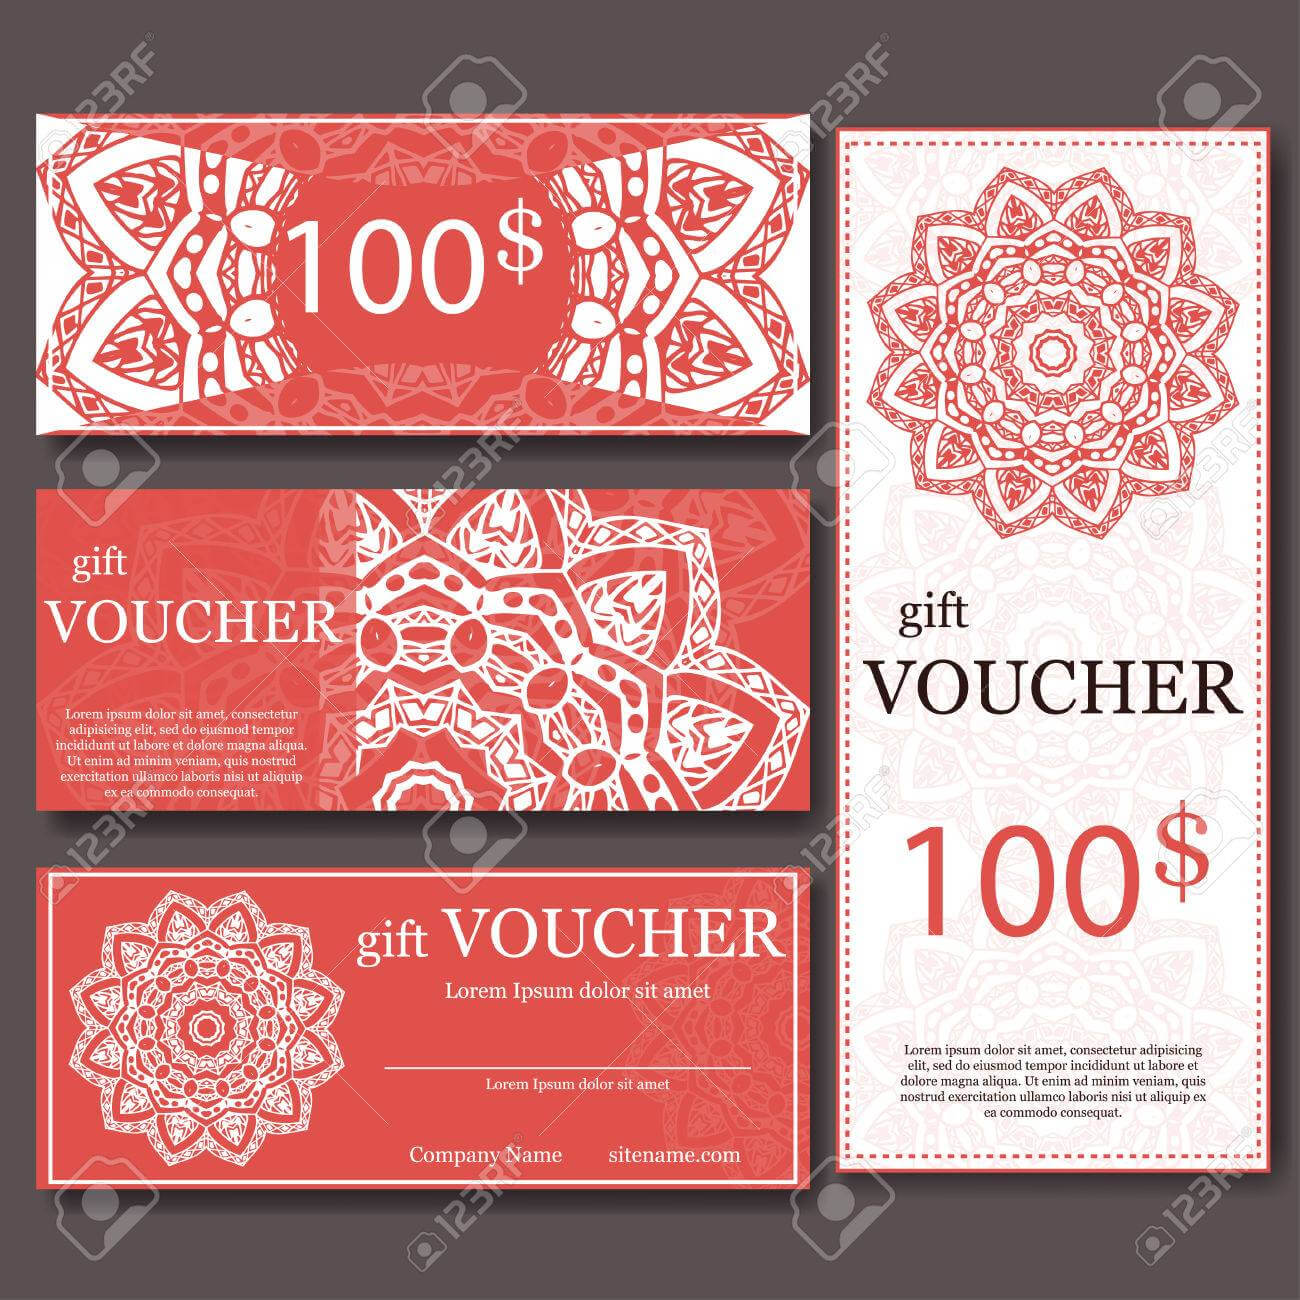 Gift Voucher Template With Mandala. Design Certificate For Sport.. Pertaining To Yoga Gift Certificate Template Free